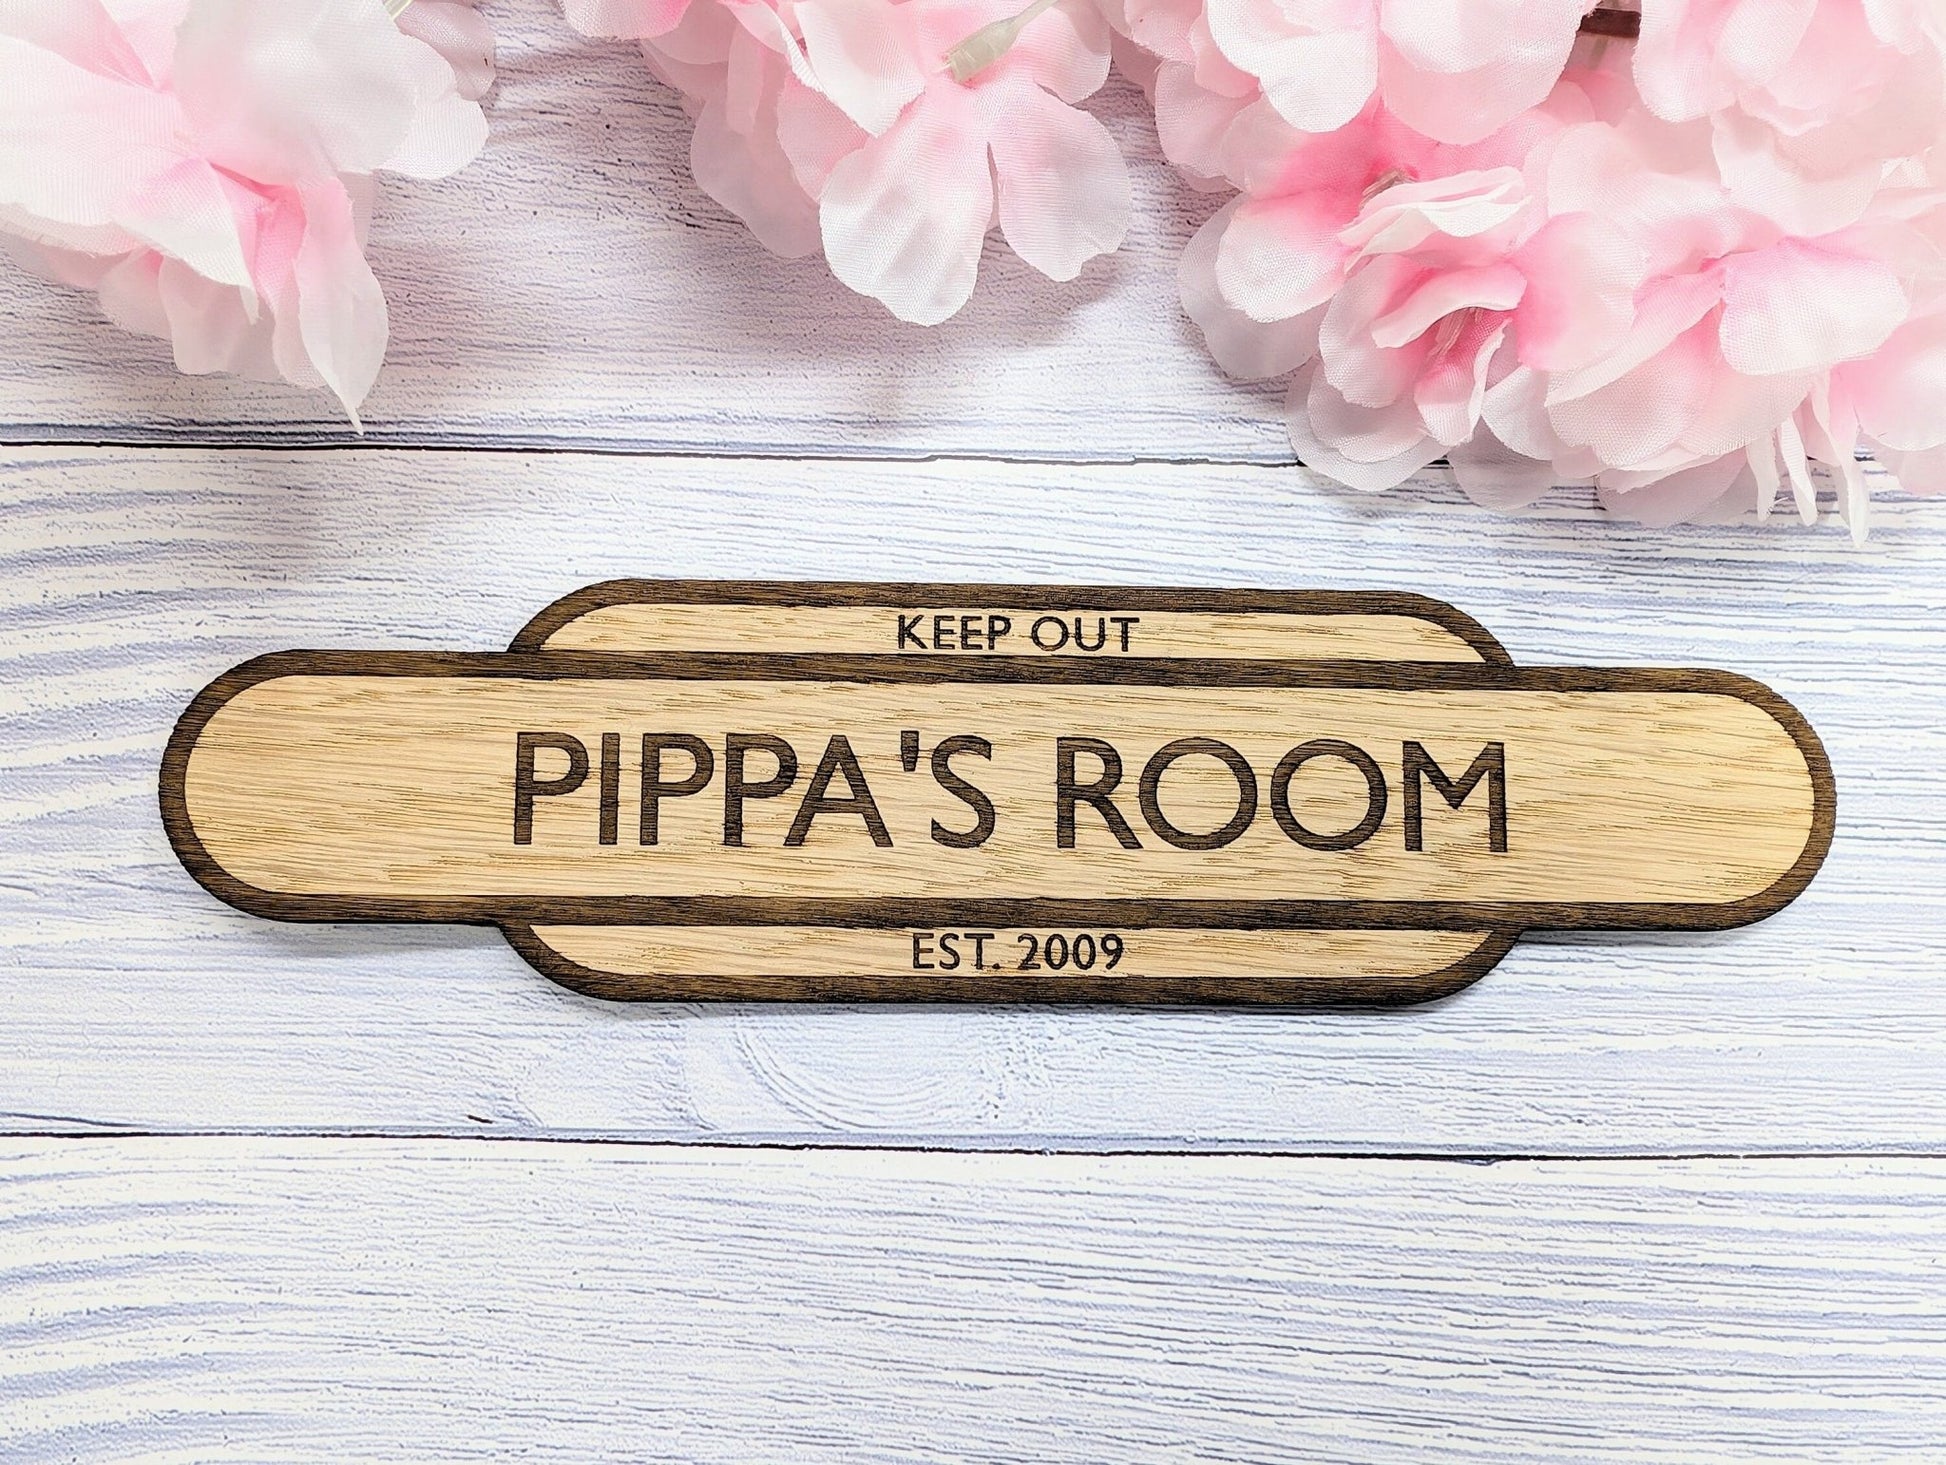 Personalised Railway Station Room Name Sign - Oak MDF - Customizable Text, 4 Sizes - Eco-Friendly, British Crafted Door Sign - CherryGroveCraft